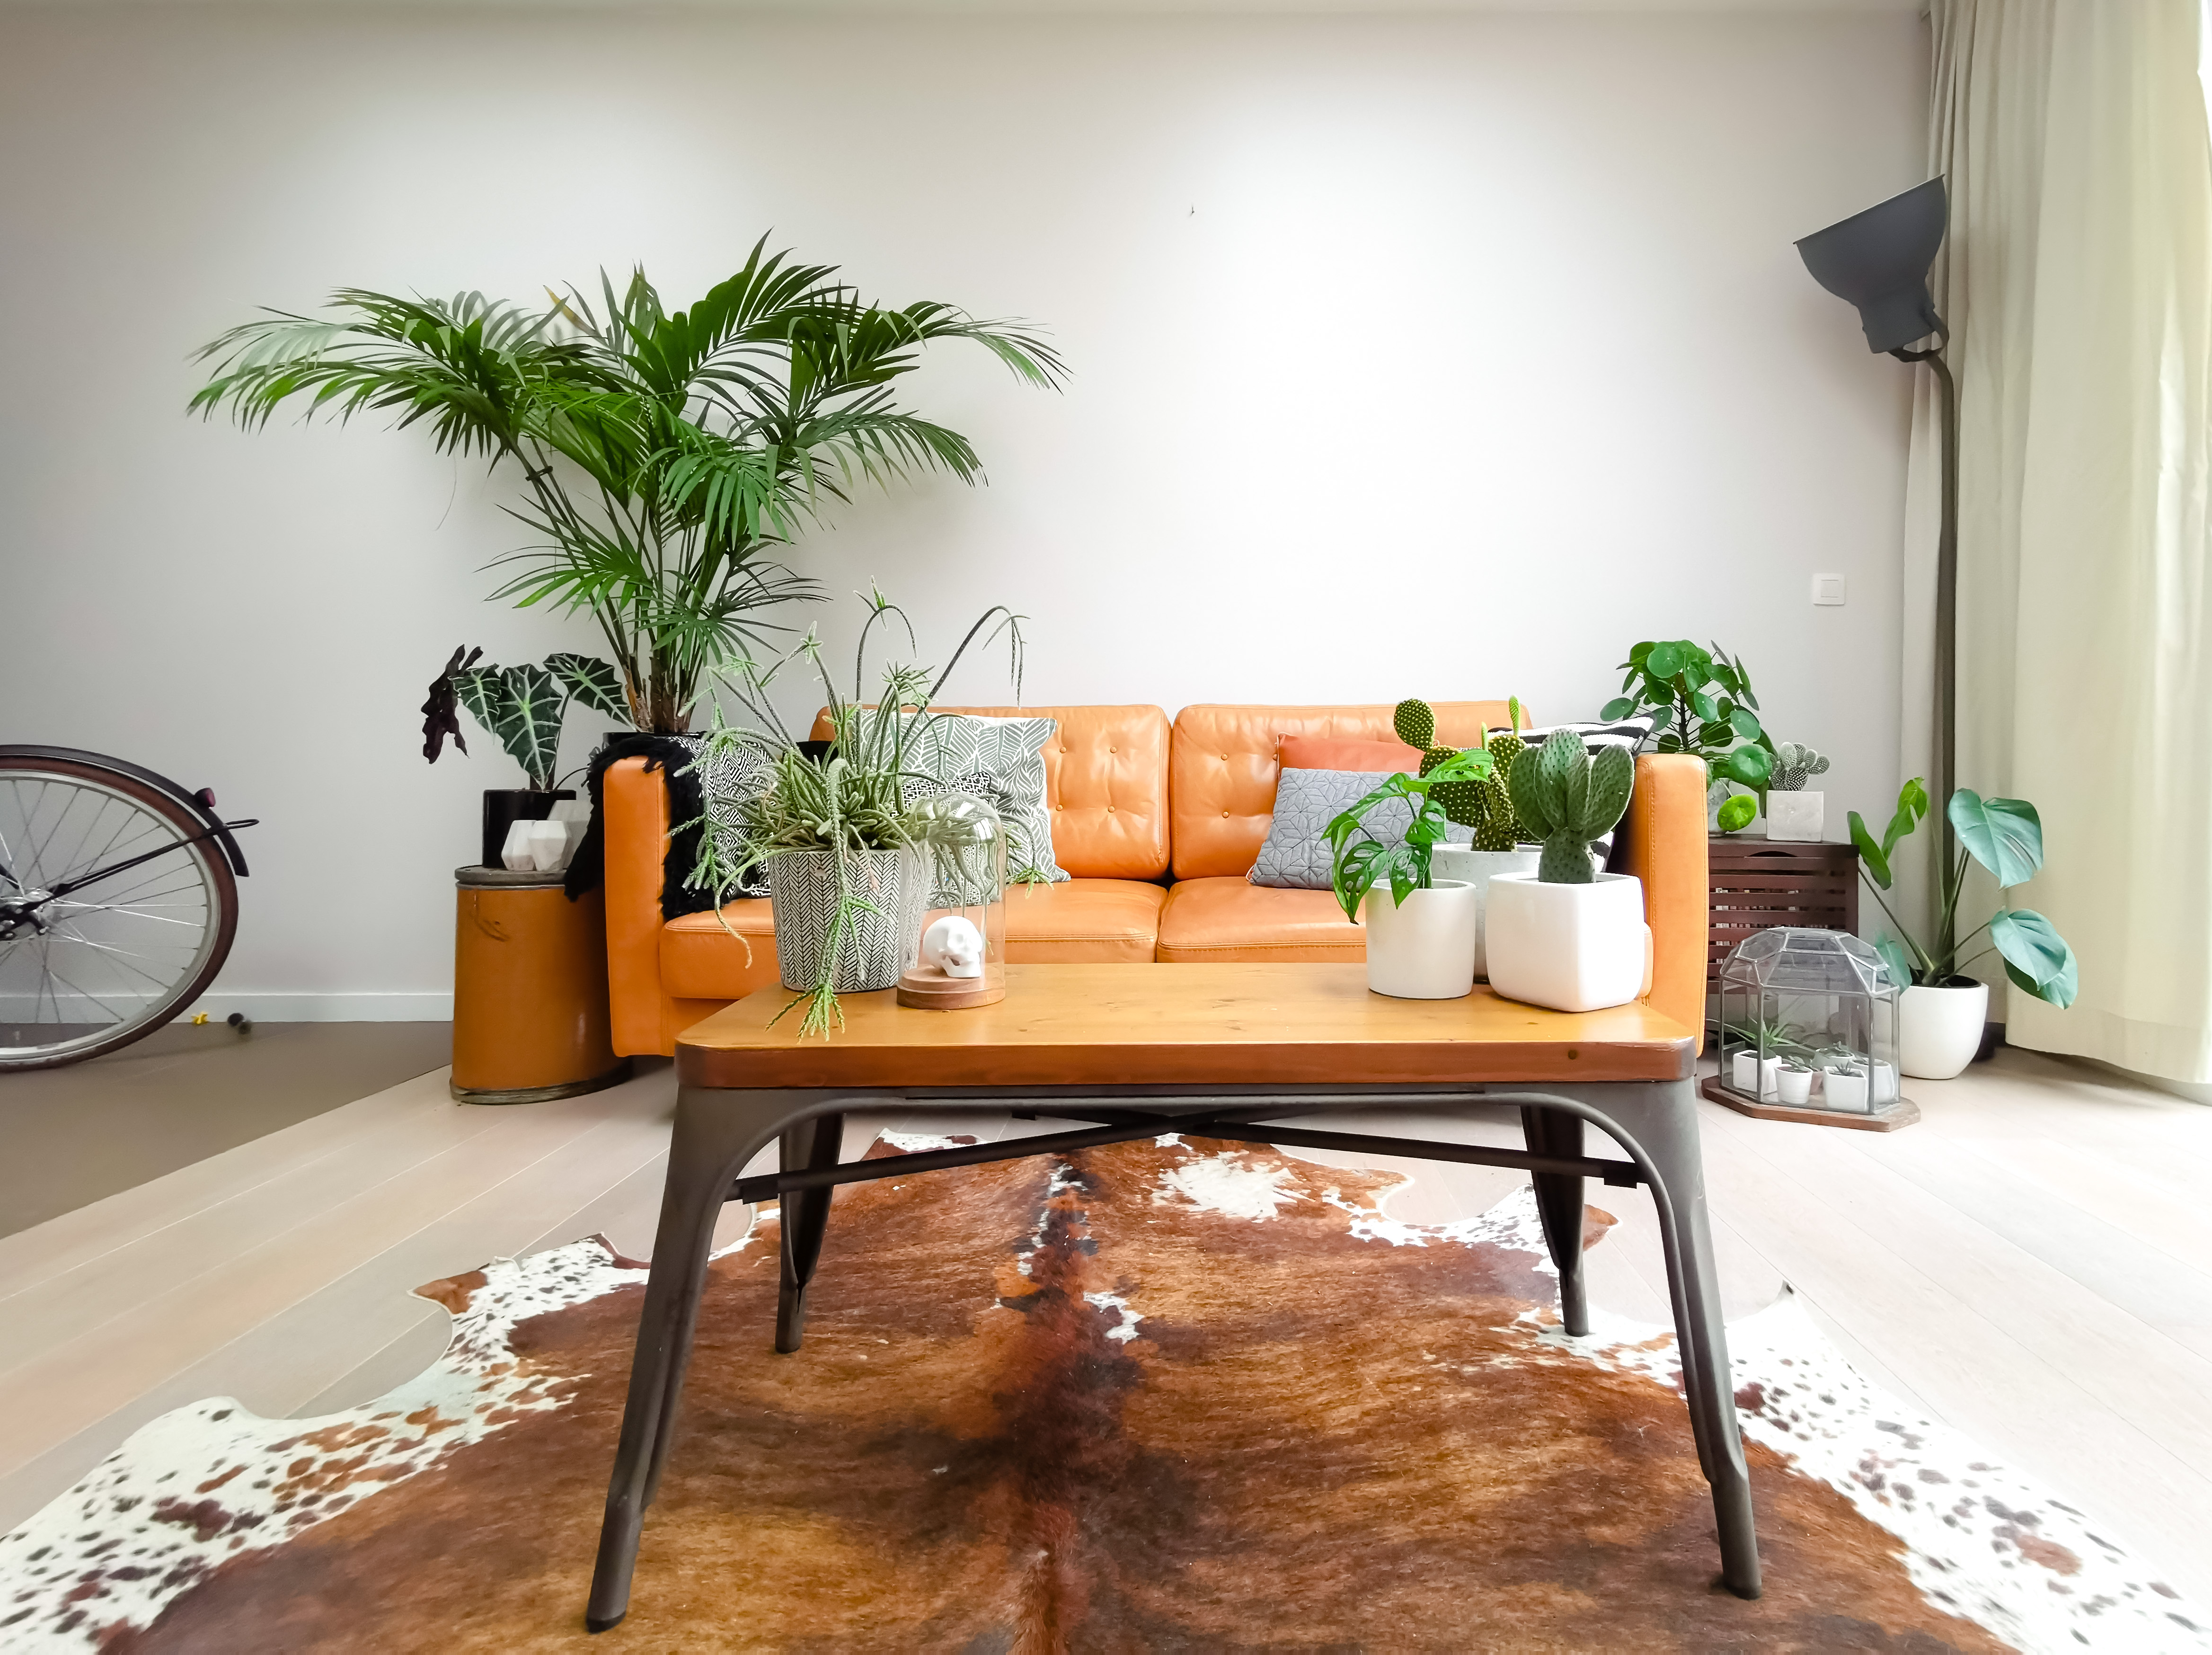 A cowhide rug in a modern living room | Source: Shutterstock